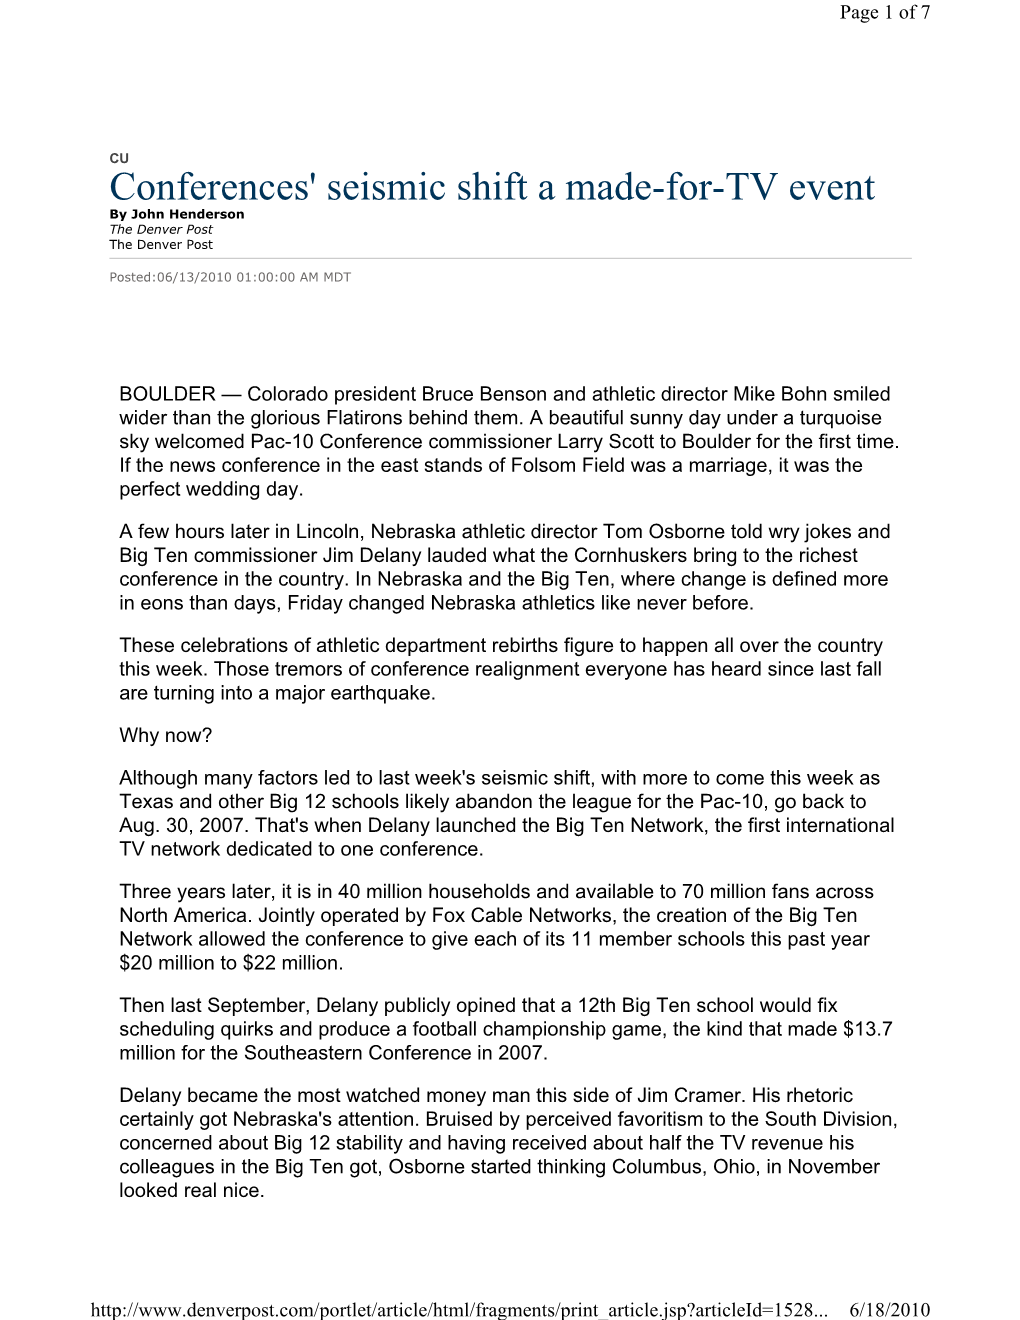 Conferences' Seismic Shift a Made-For-TV Event by John Henderson the Denver Post the Denver Post